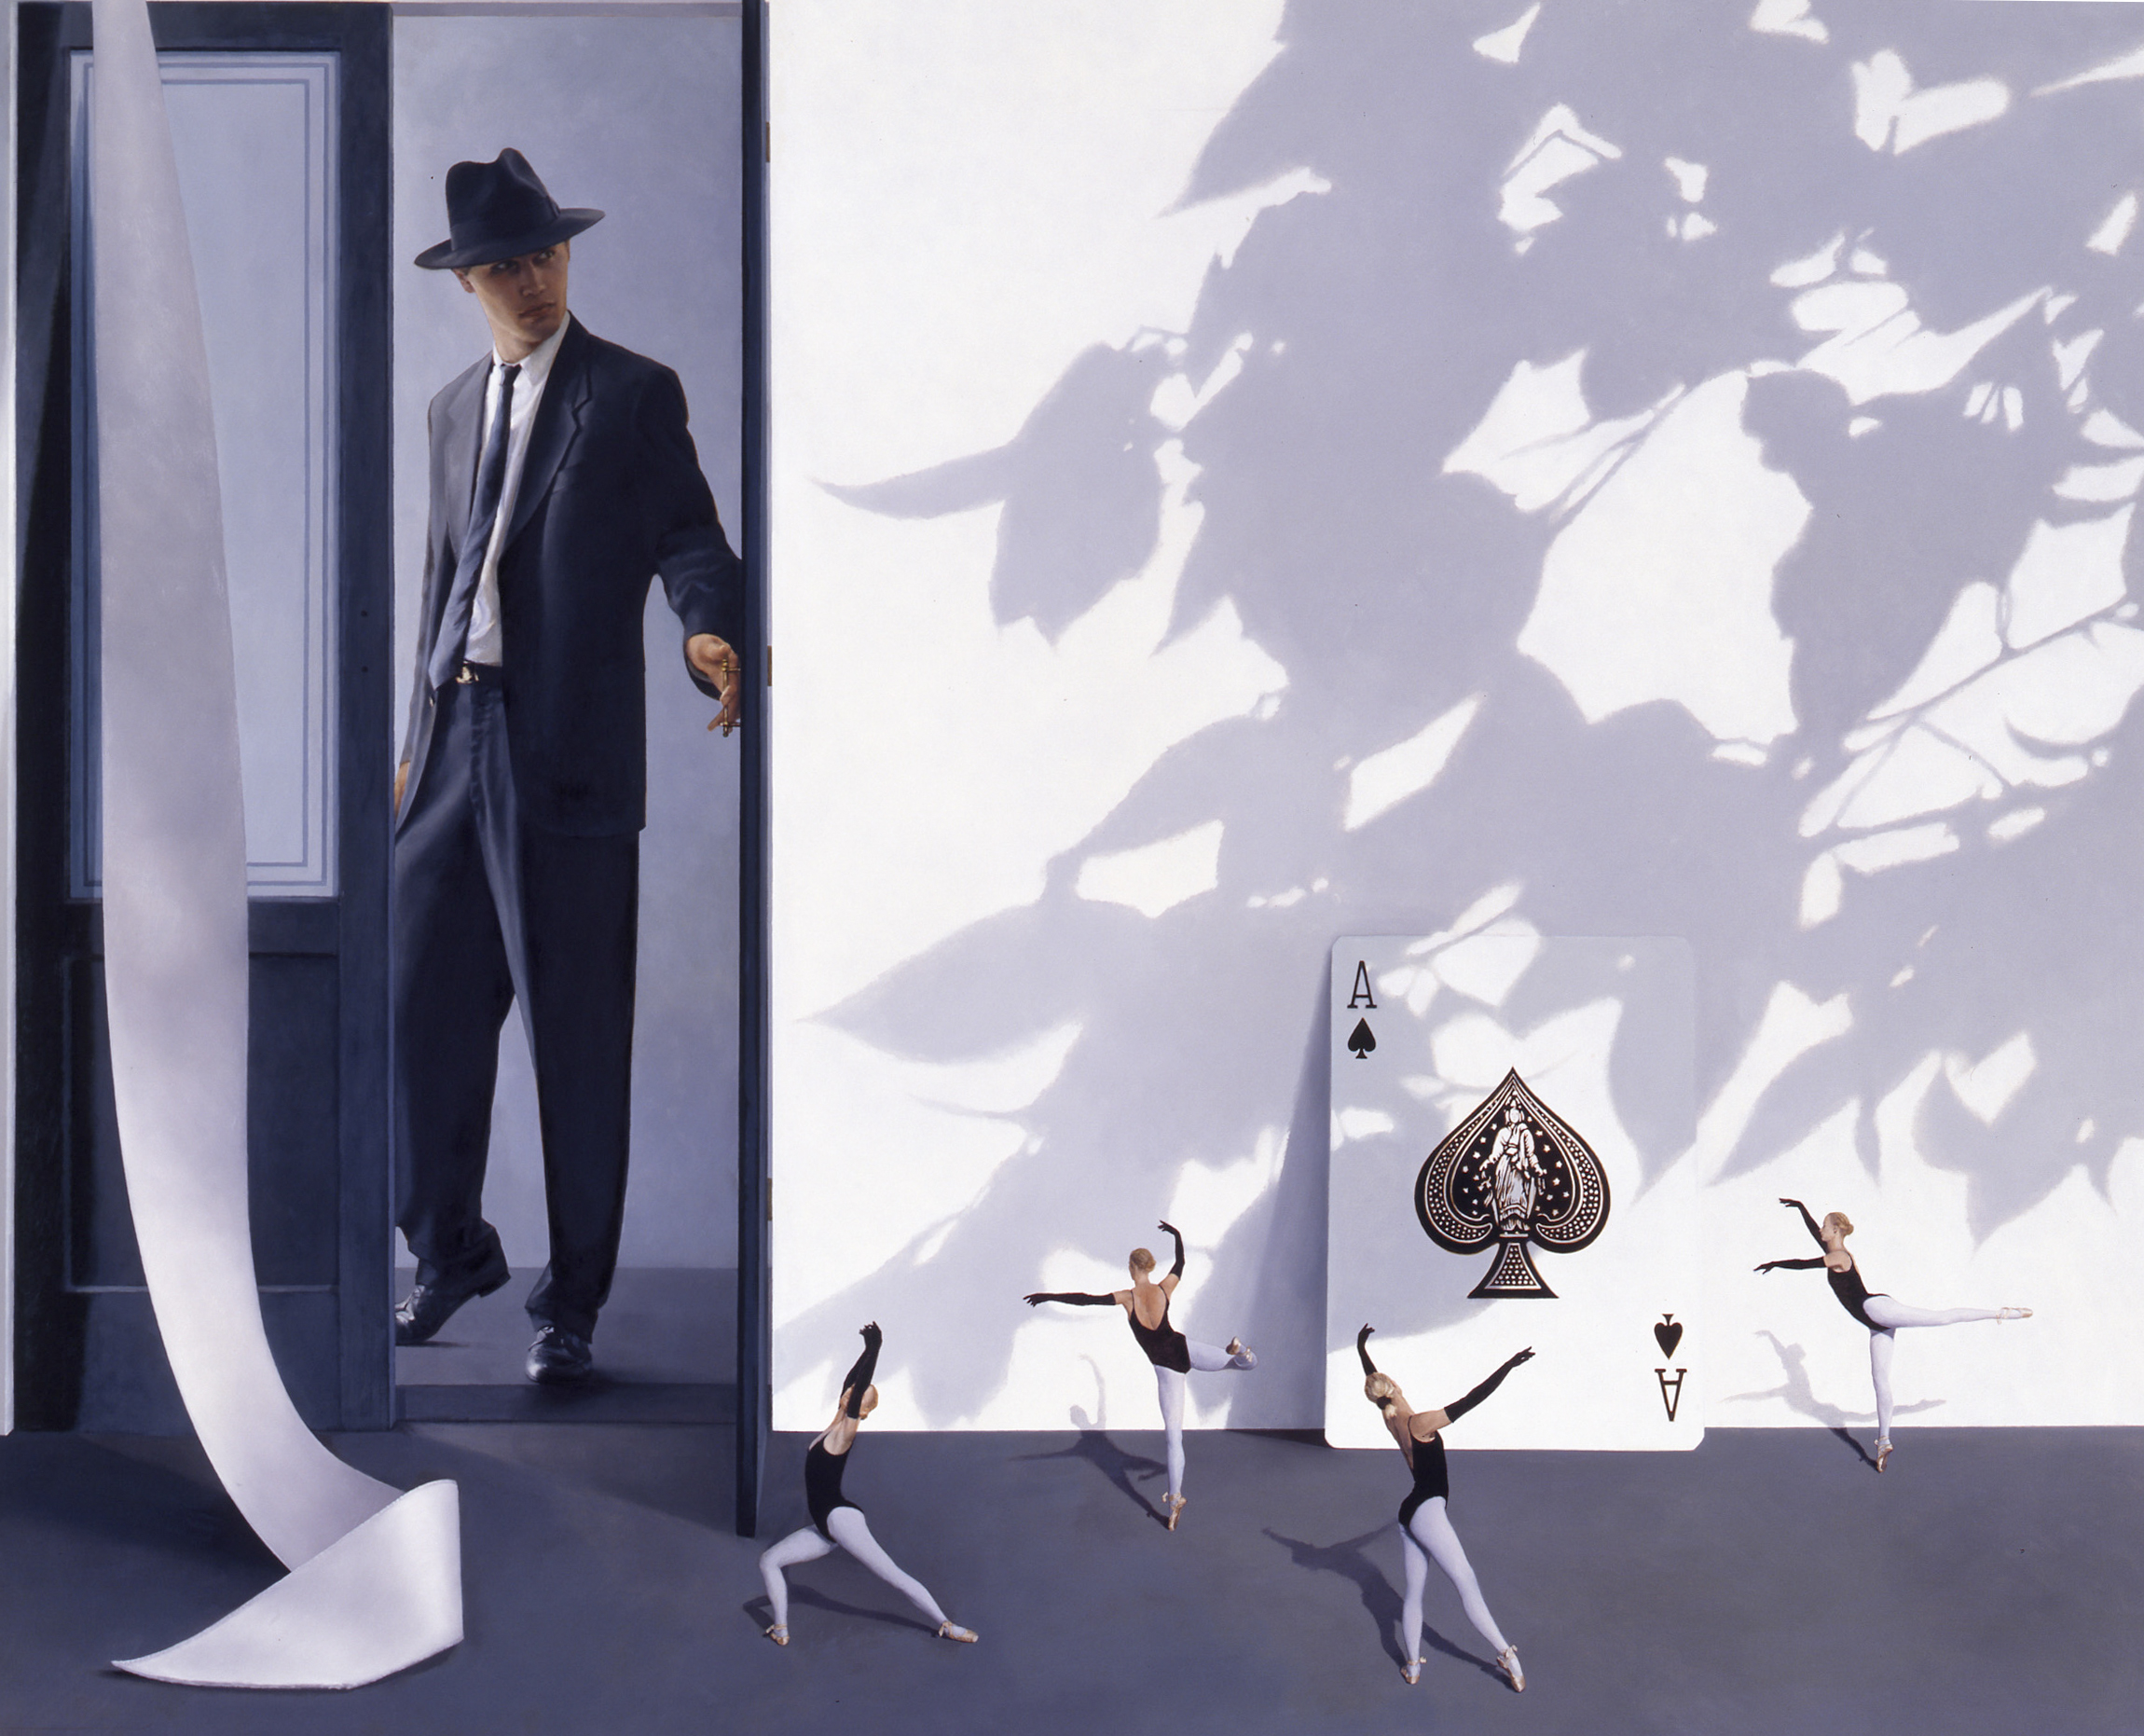 white wall with shadows, male figure wearing suit and fedora hat standing in doorway, shadows on white wall, diminutive ballet dancers, ribbon, giant Ace of Spades playing card leaning on wall